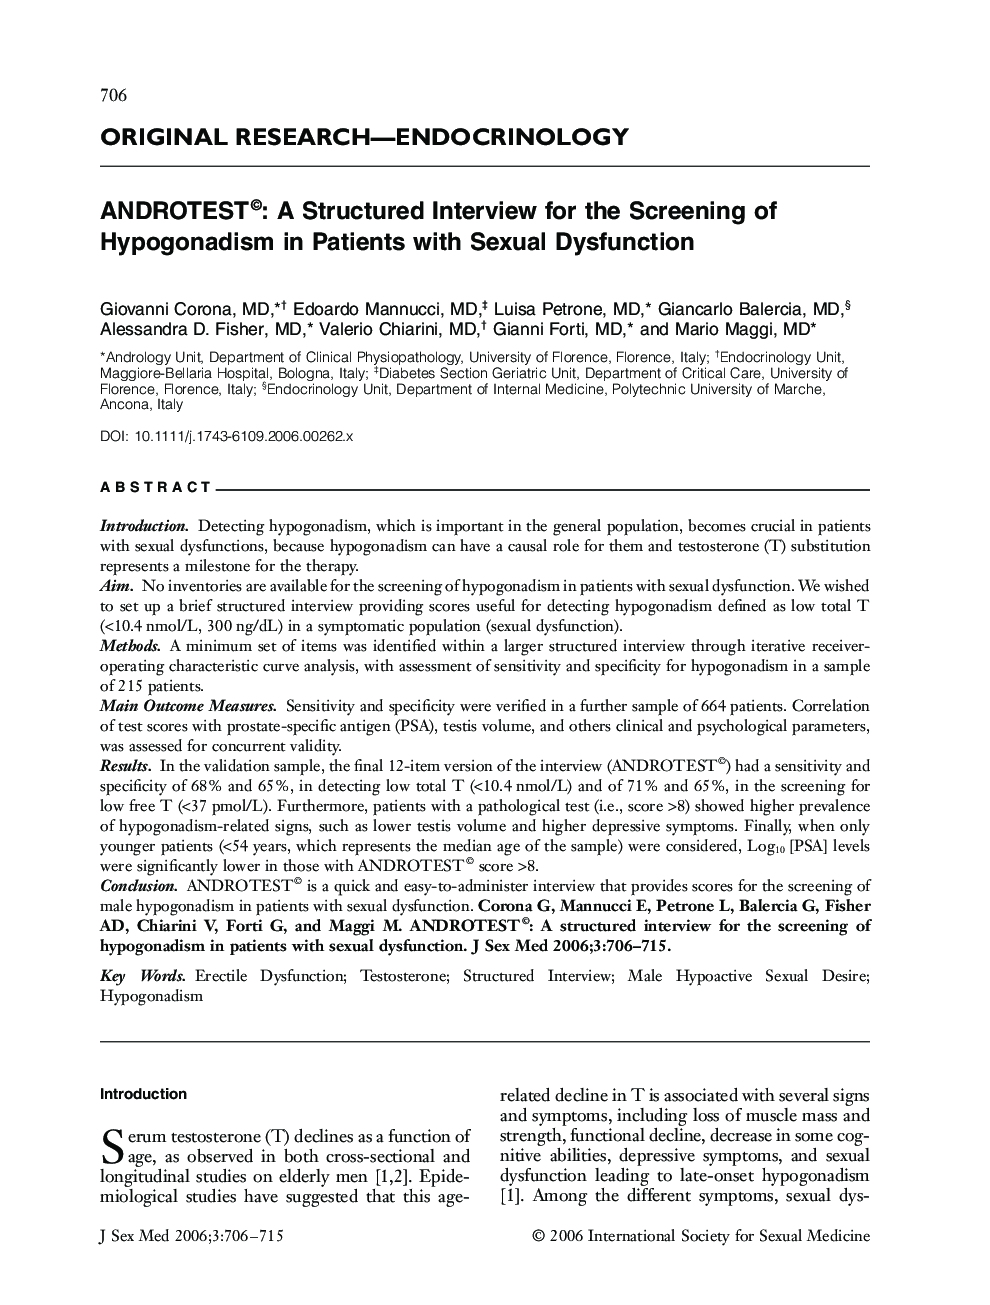 ORIGINAL RESEARCH-ENDOCRINOLOGY: ANDROTEST©: A Structured Interview for the Screening of Hypogonadism in Patients with Sexual Dysfunction